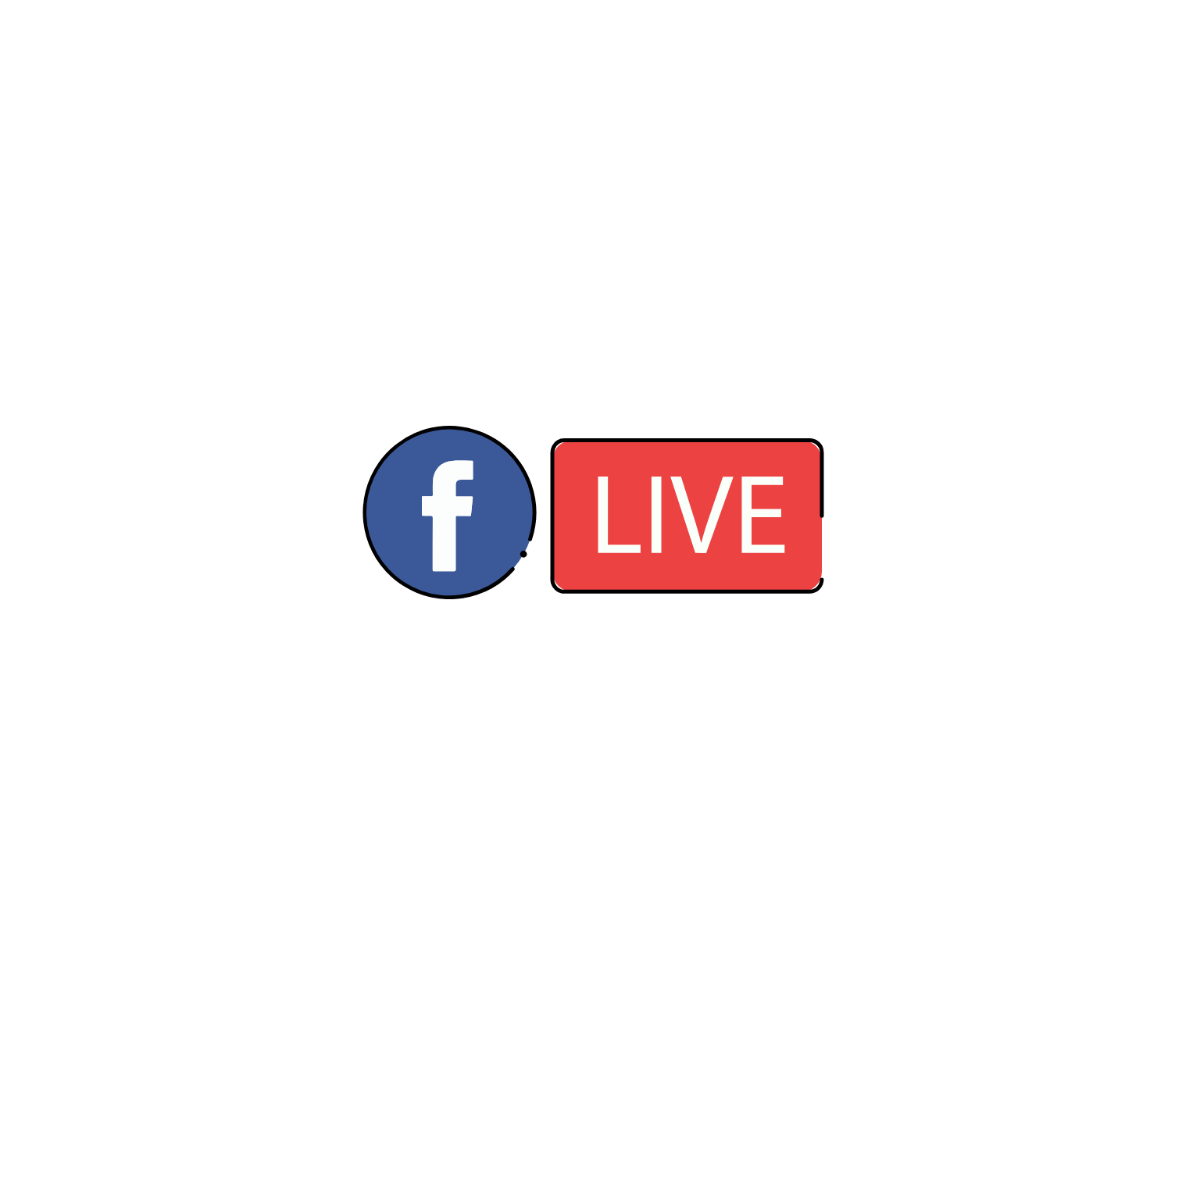 Facebook Live Streaming